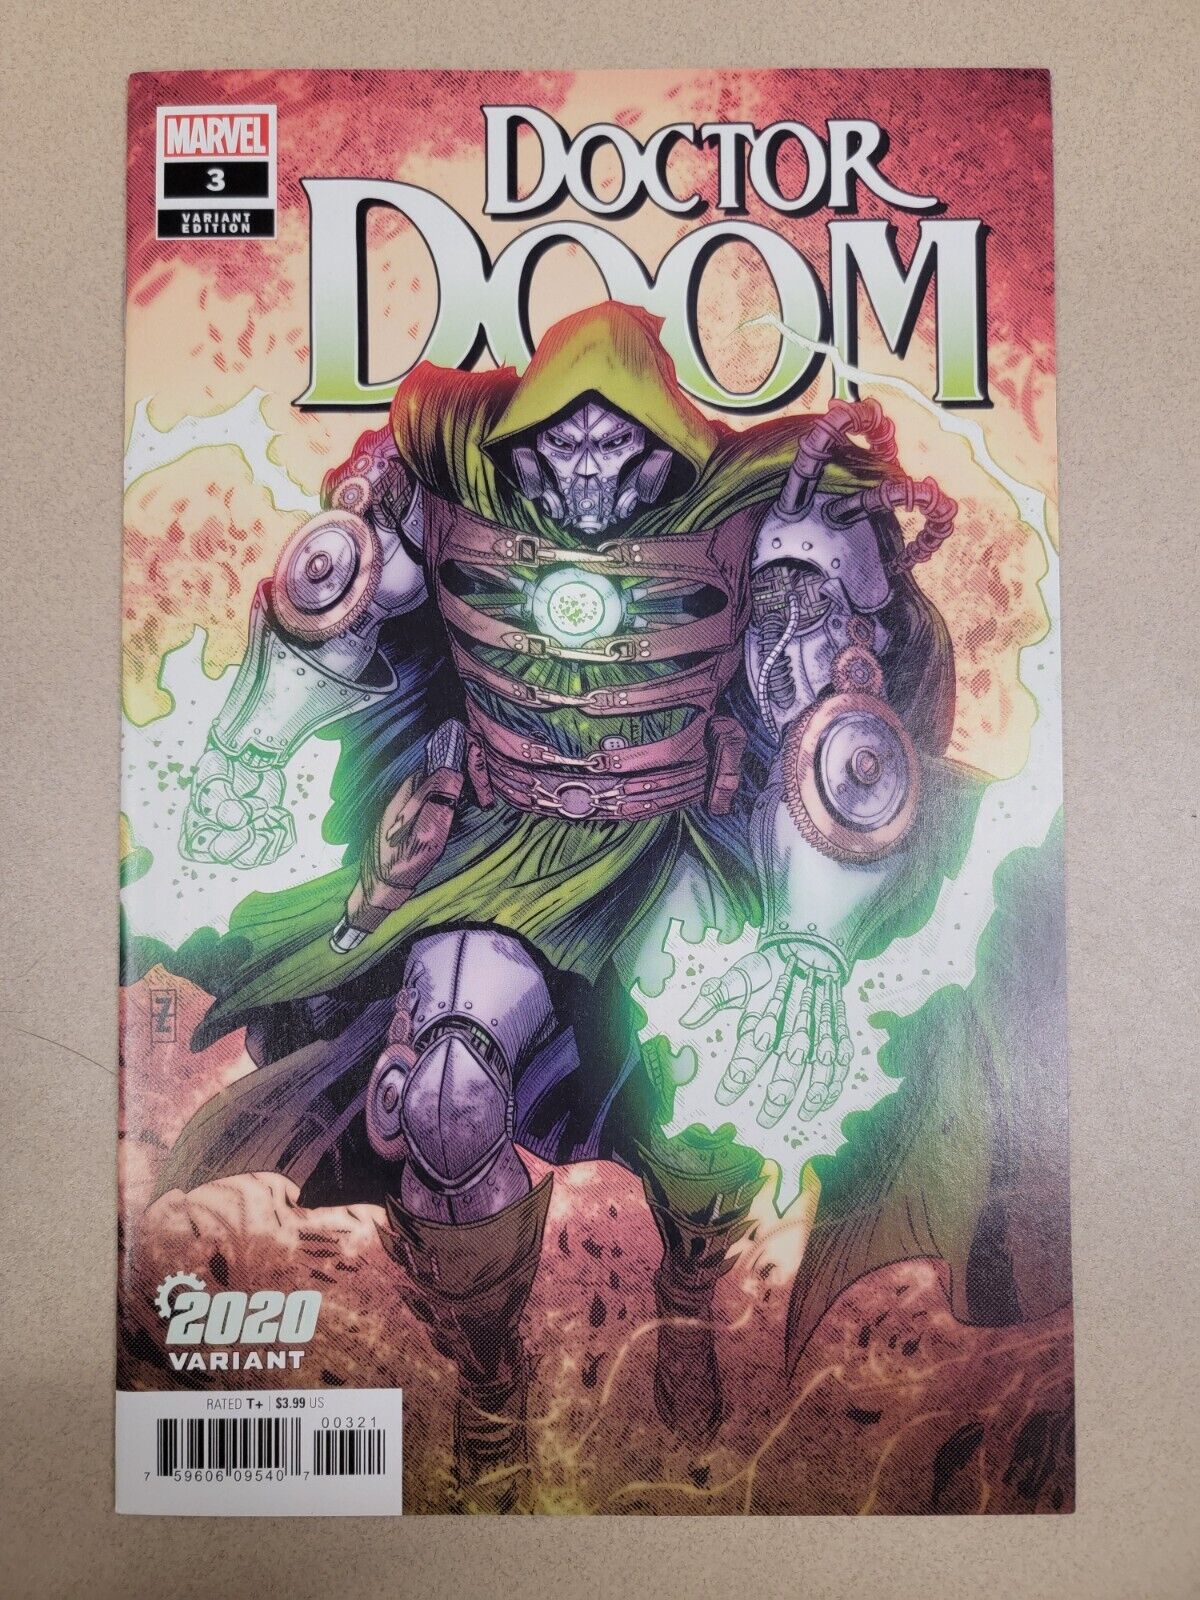 Doctor Doom Vol 1 #3 February 2020 Variant Edition Published By Marvel Comics